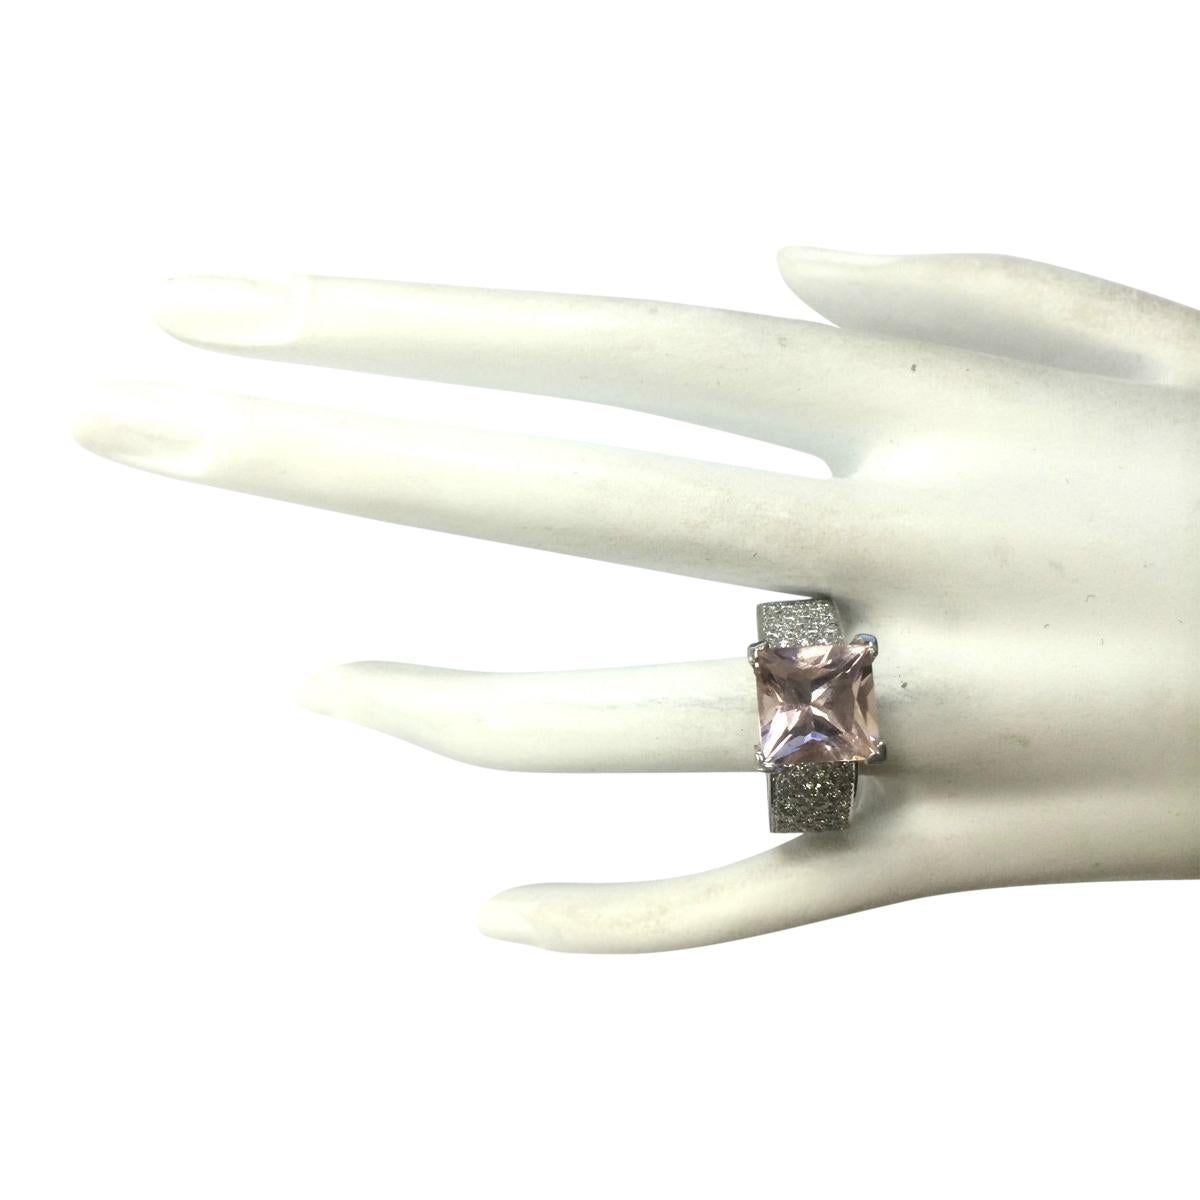 Natural Morganite Diamond Ring In 14 Karat White Gold  In New Condition For Sale In Los Angeles, CA